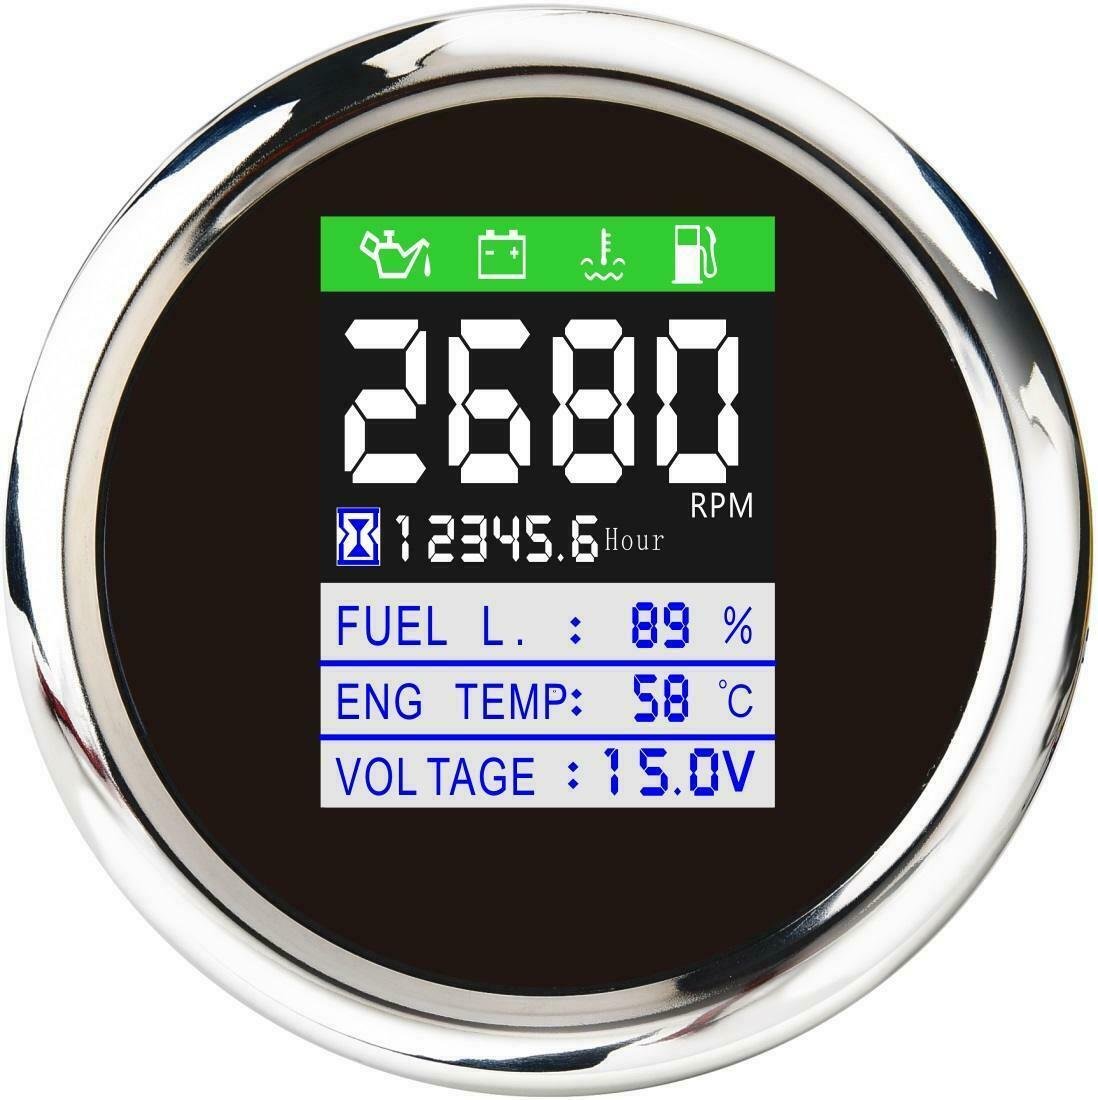 316 Stainless Steel CANbus Multifunction Gauge IP67 85mm For Marine Boat Yacht